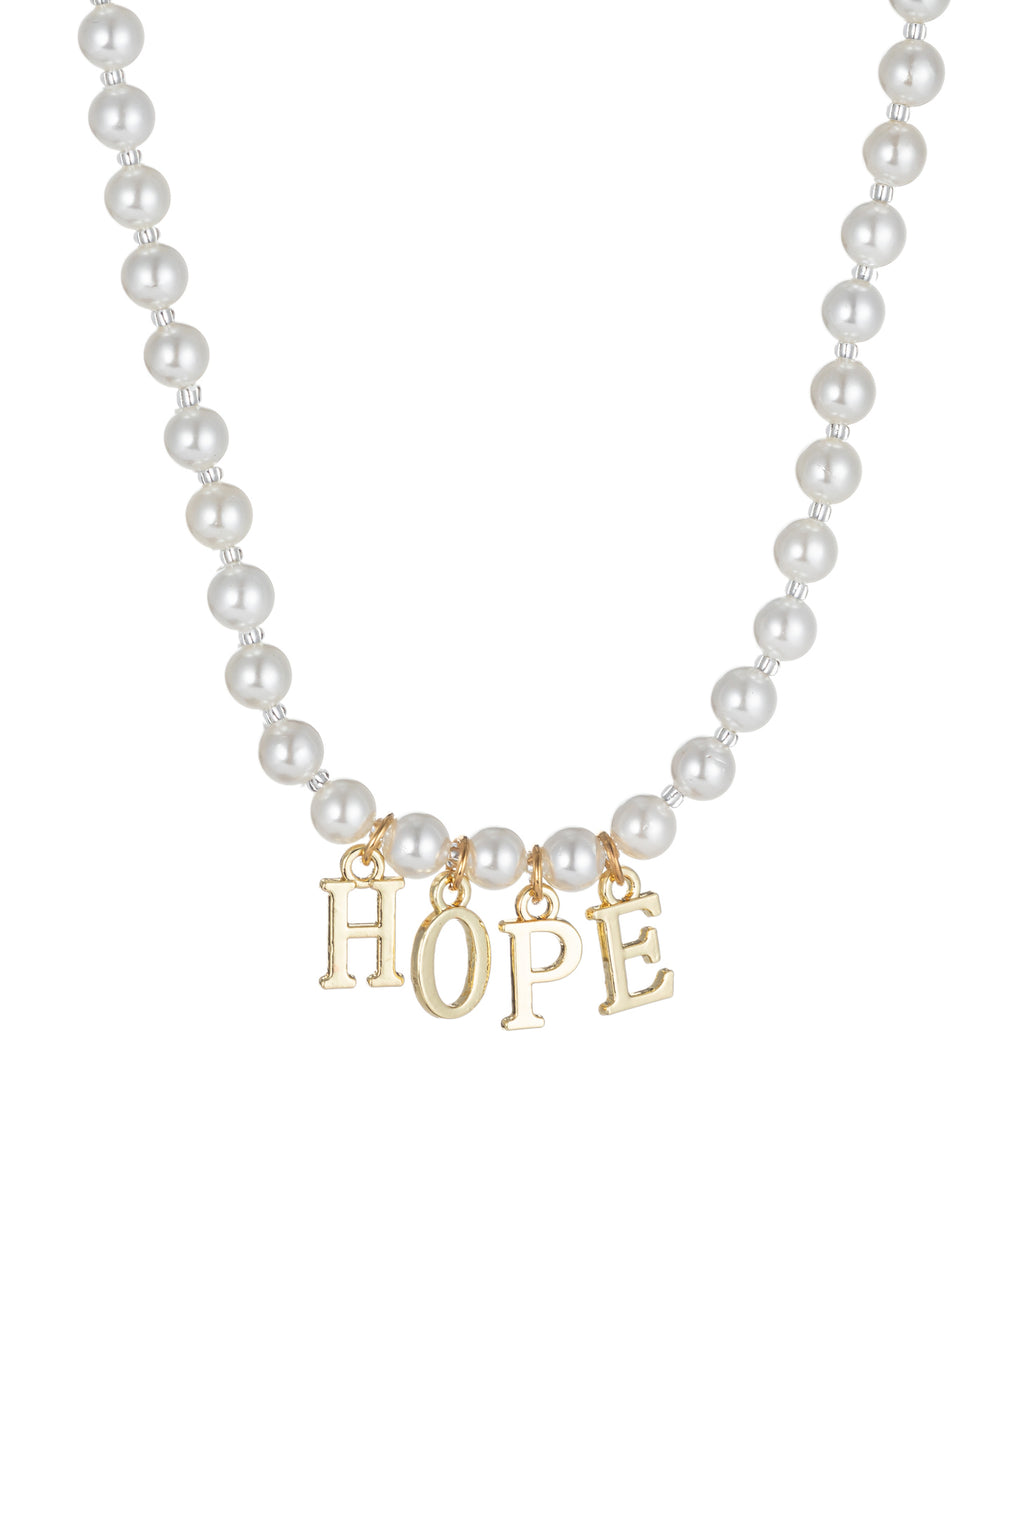 Shell pearl necklace with a pendant that says HOPE.